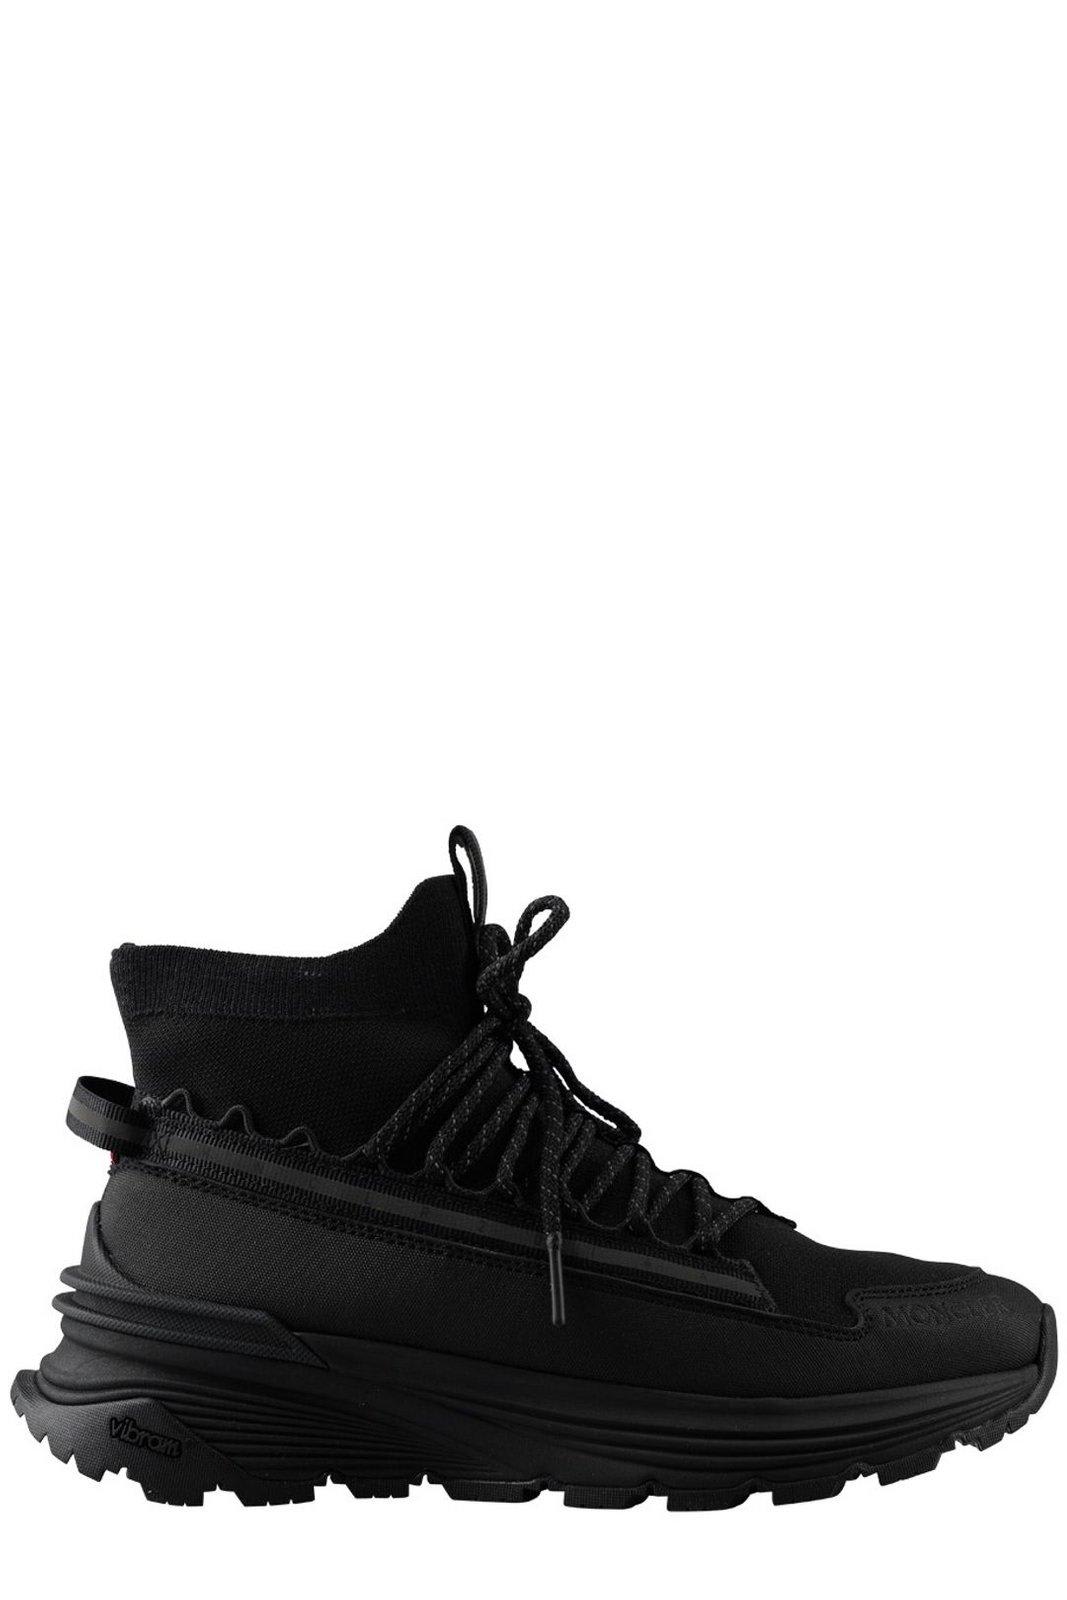 Moncler Monte Runner Lace-up Sneakers